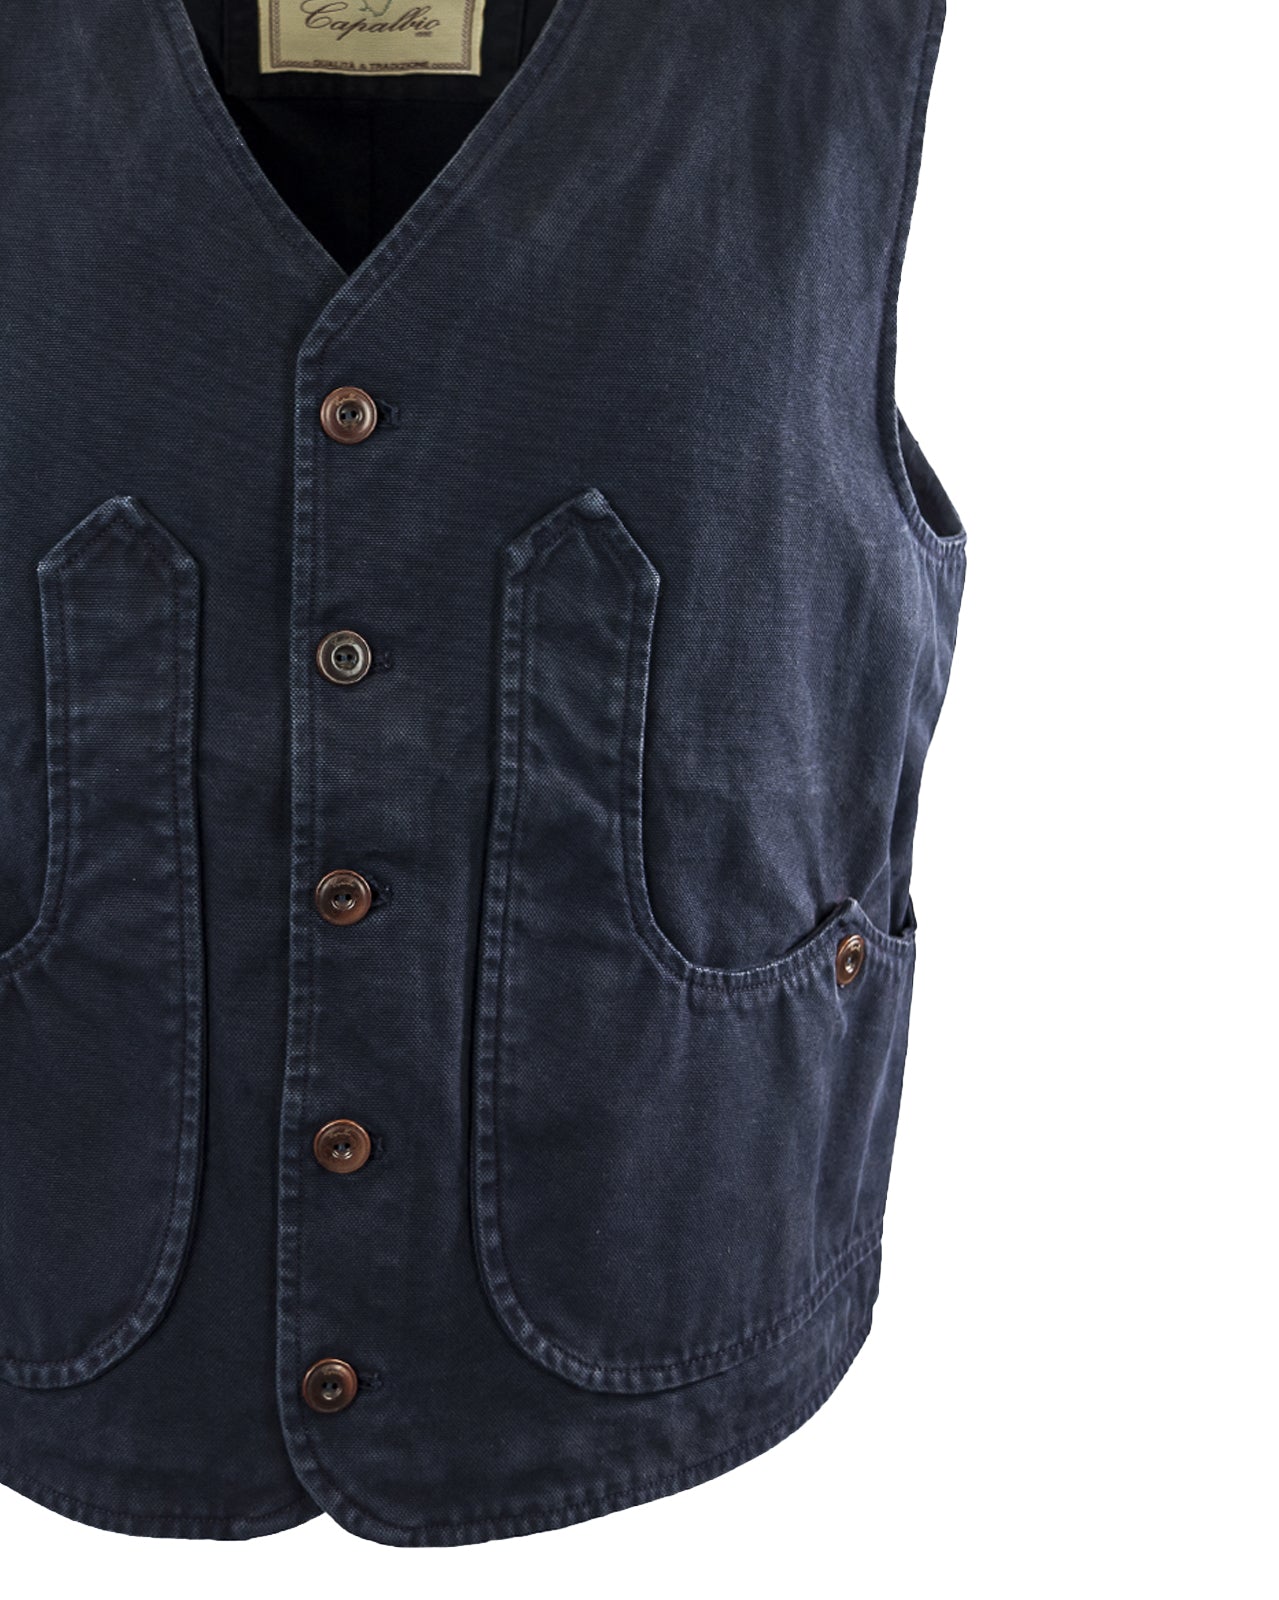 ICONIC VEST IN CANVASS COTTON